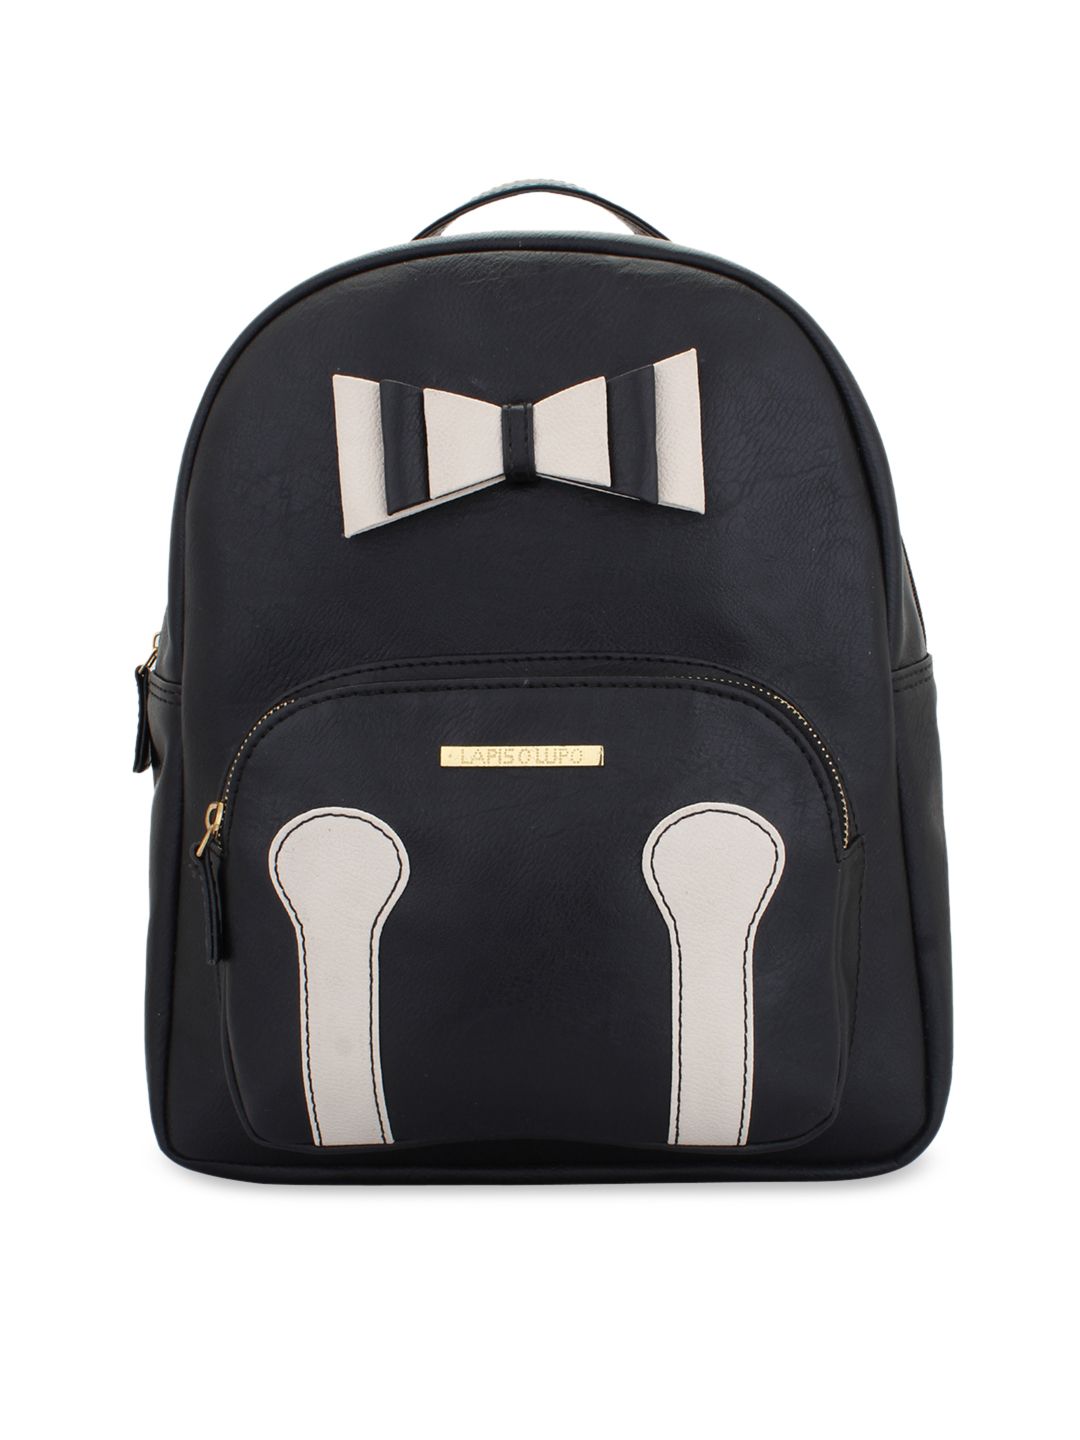 Lapis O Lupo Women Black Solid Backpack Price in India